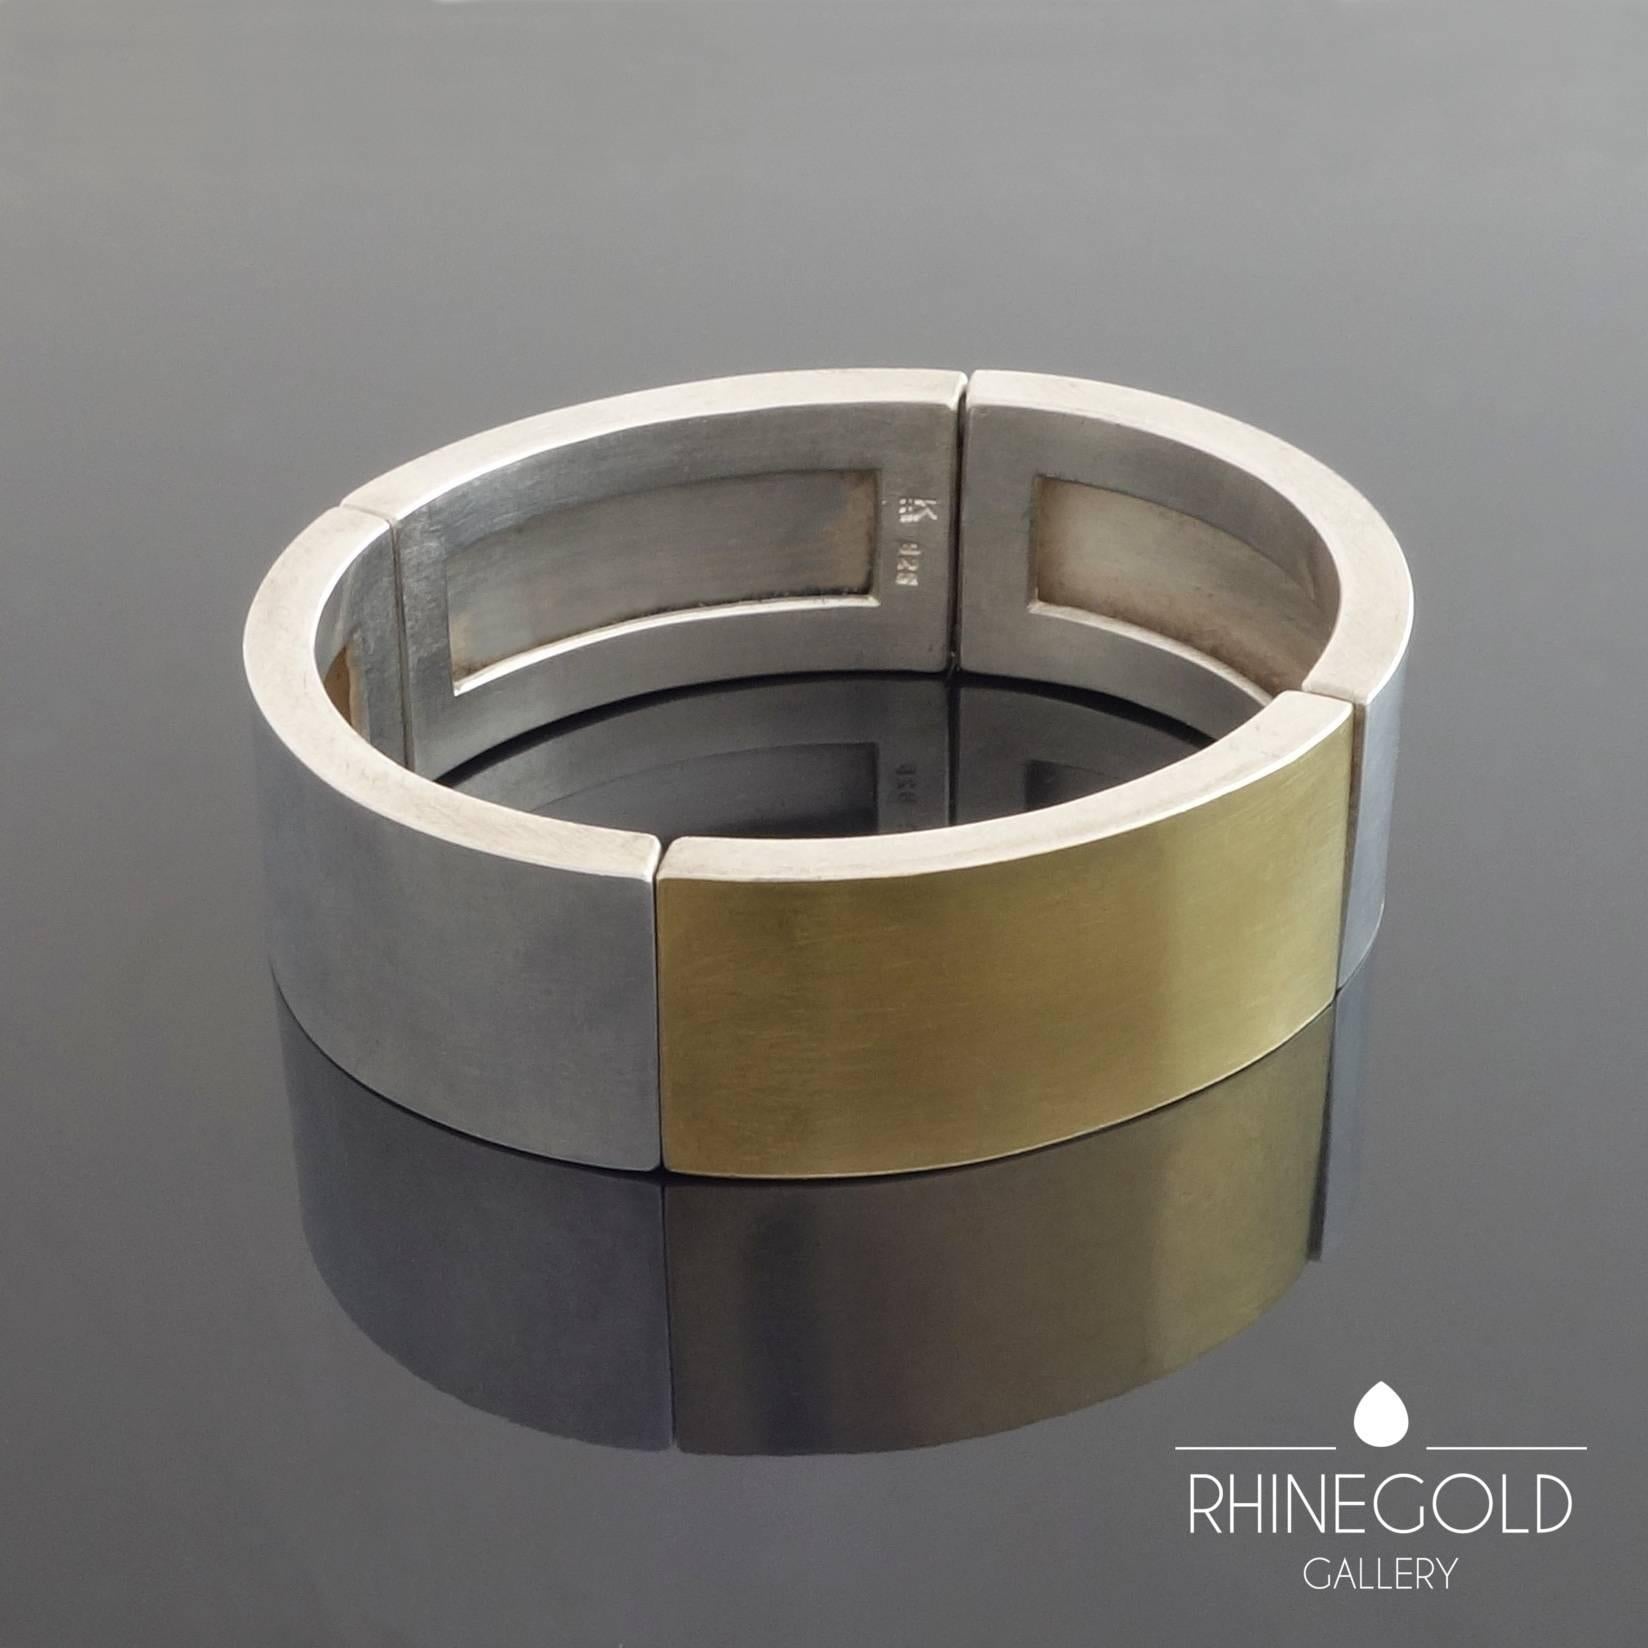 Monika Killinger (1941 -):  Modern Flexible Gold Silver Bangle
Sterling silver, fine gold (0.999), rubber band
Width 1.85 cm (approx. 3/4"); internal dimensions 5.8 cm to 5.1 cm (approx. 2 5/16" to 2")
Weight approx. 50.5